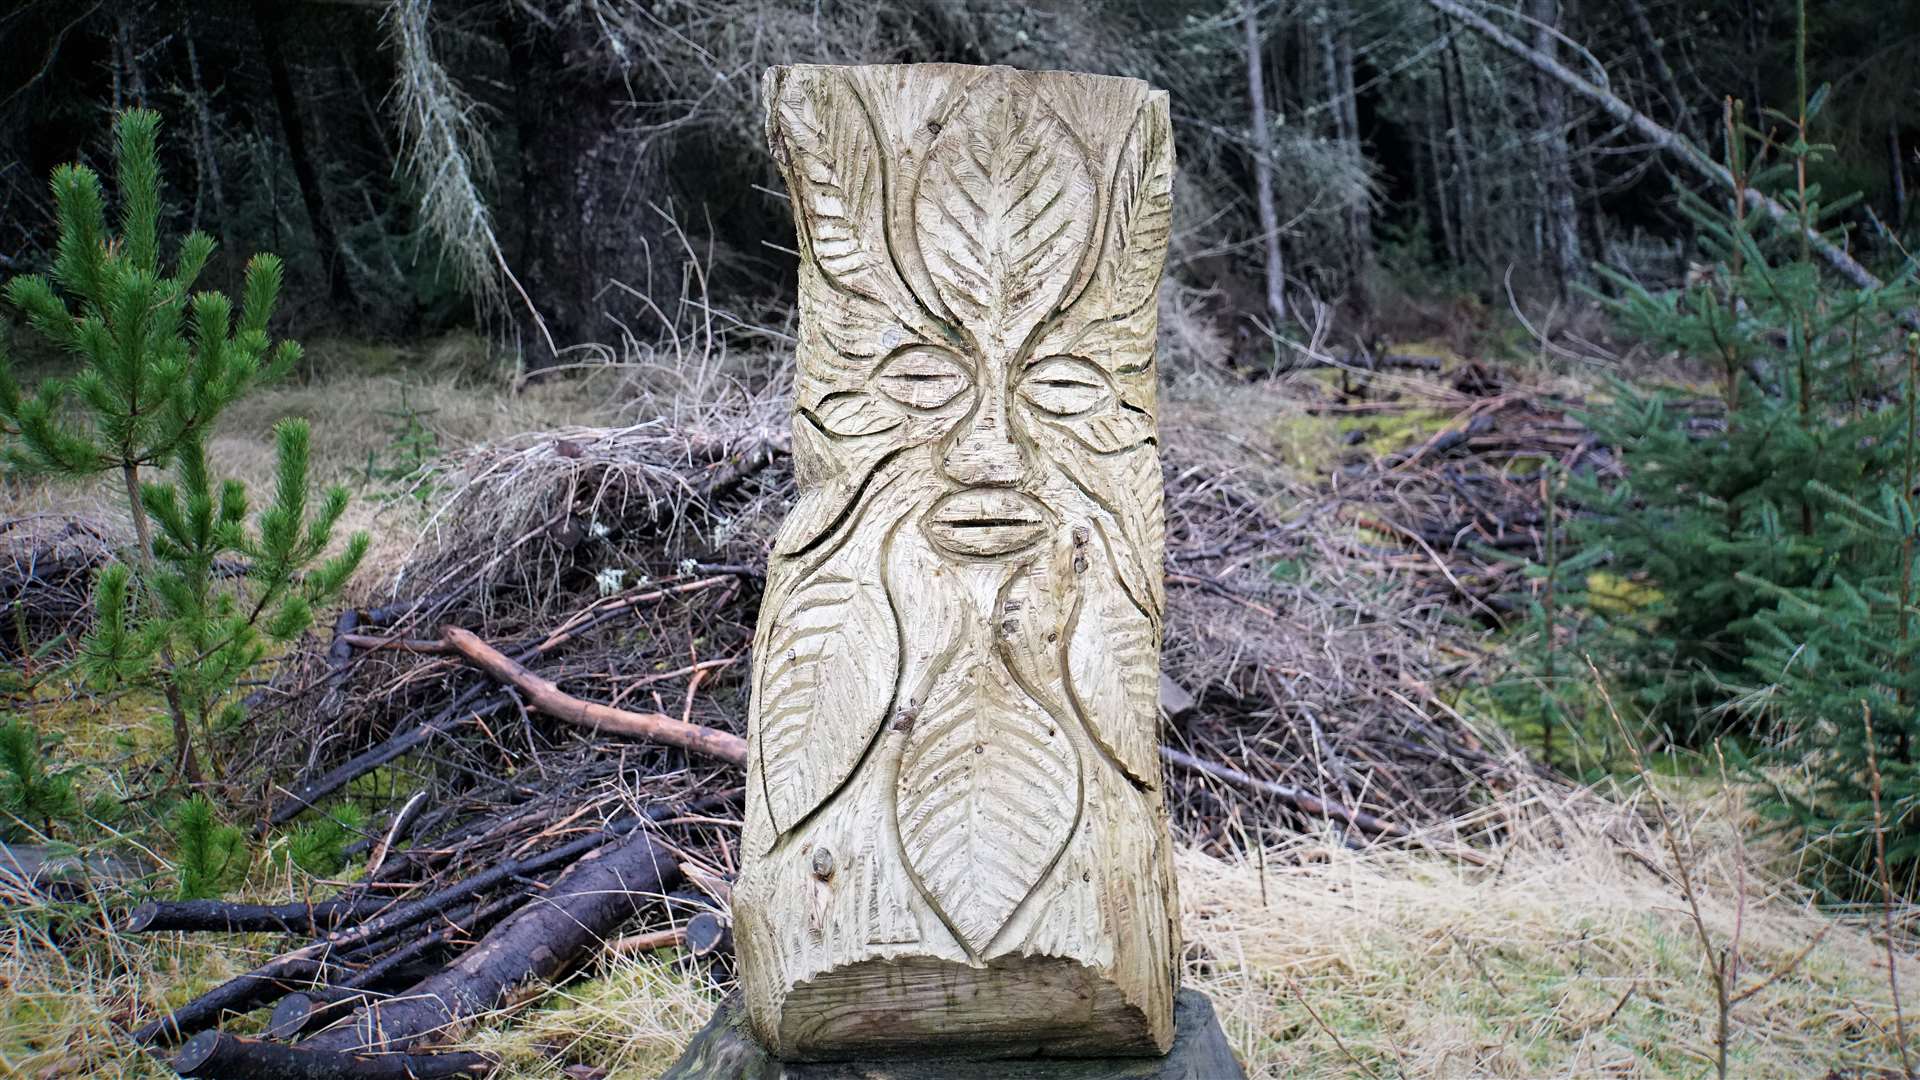 The creative works within Dunnet Forest help make it a popular attraction. Picture: DGS